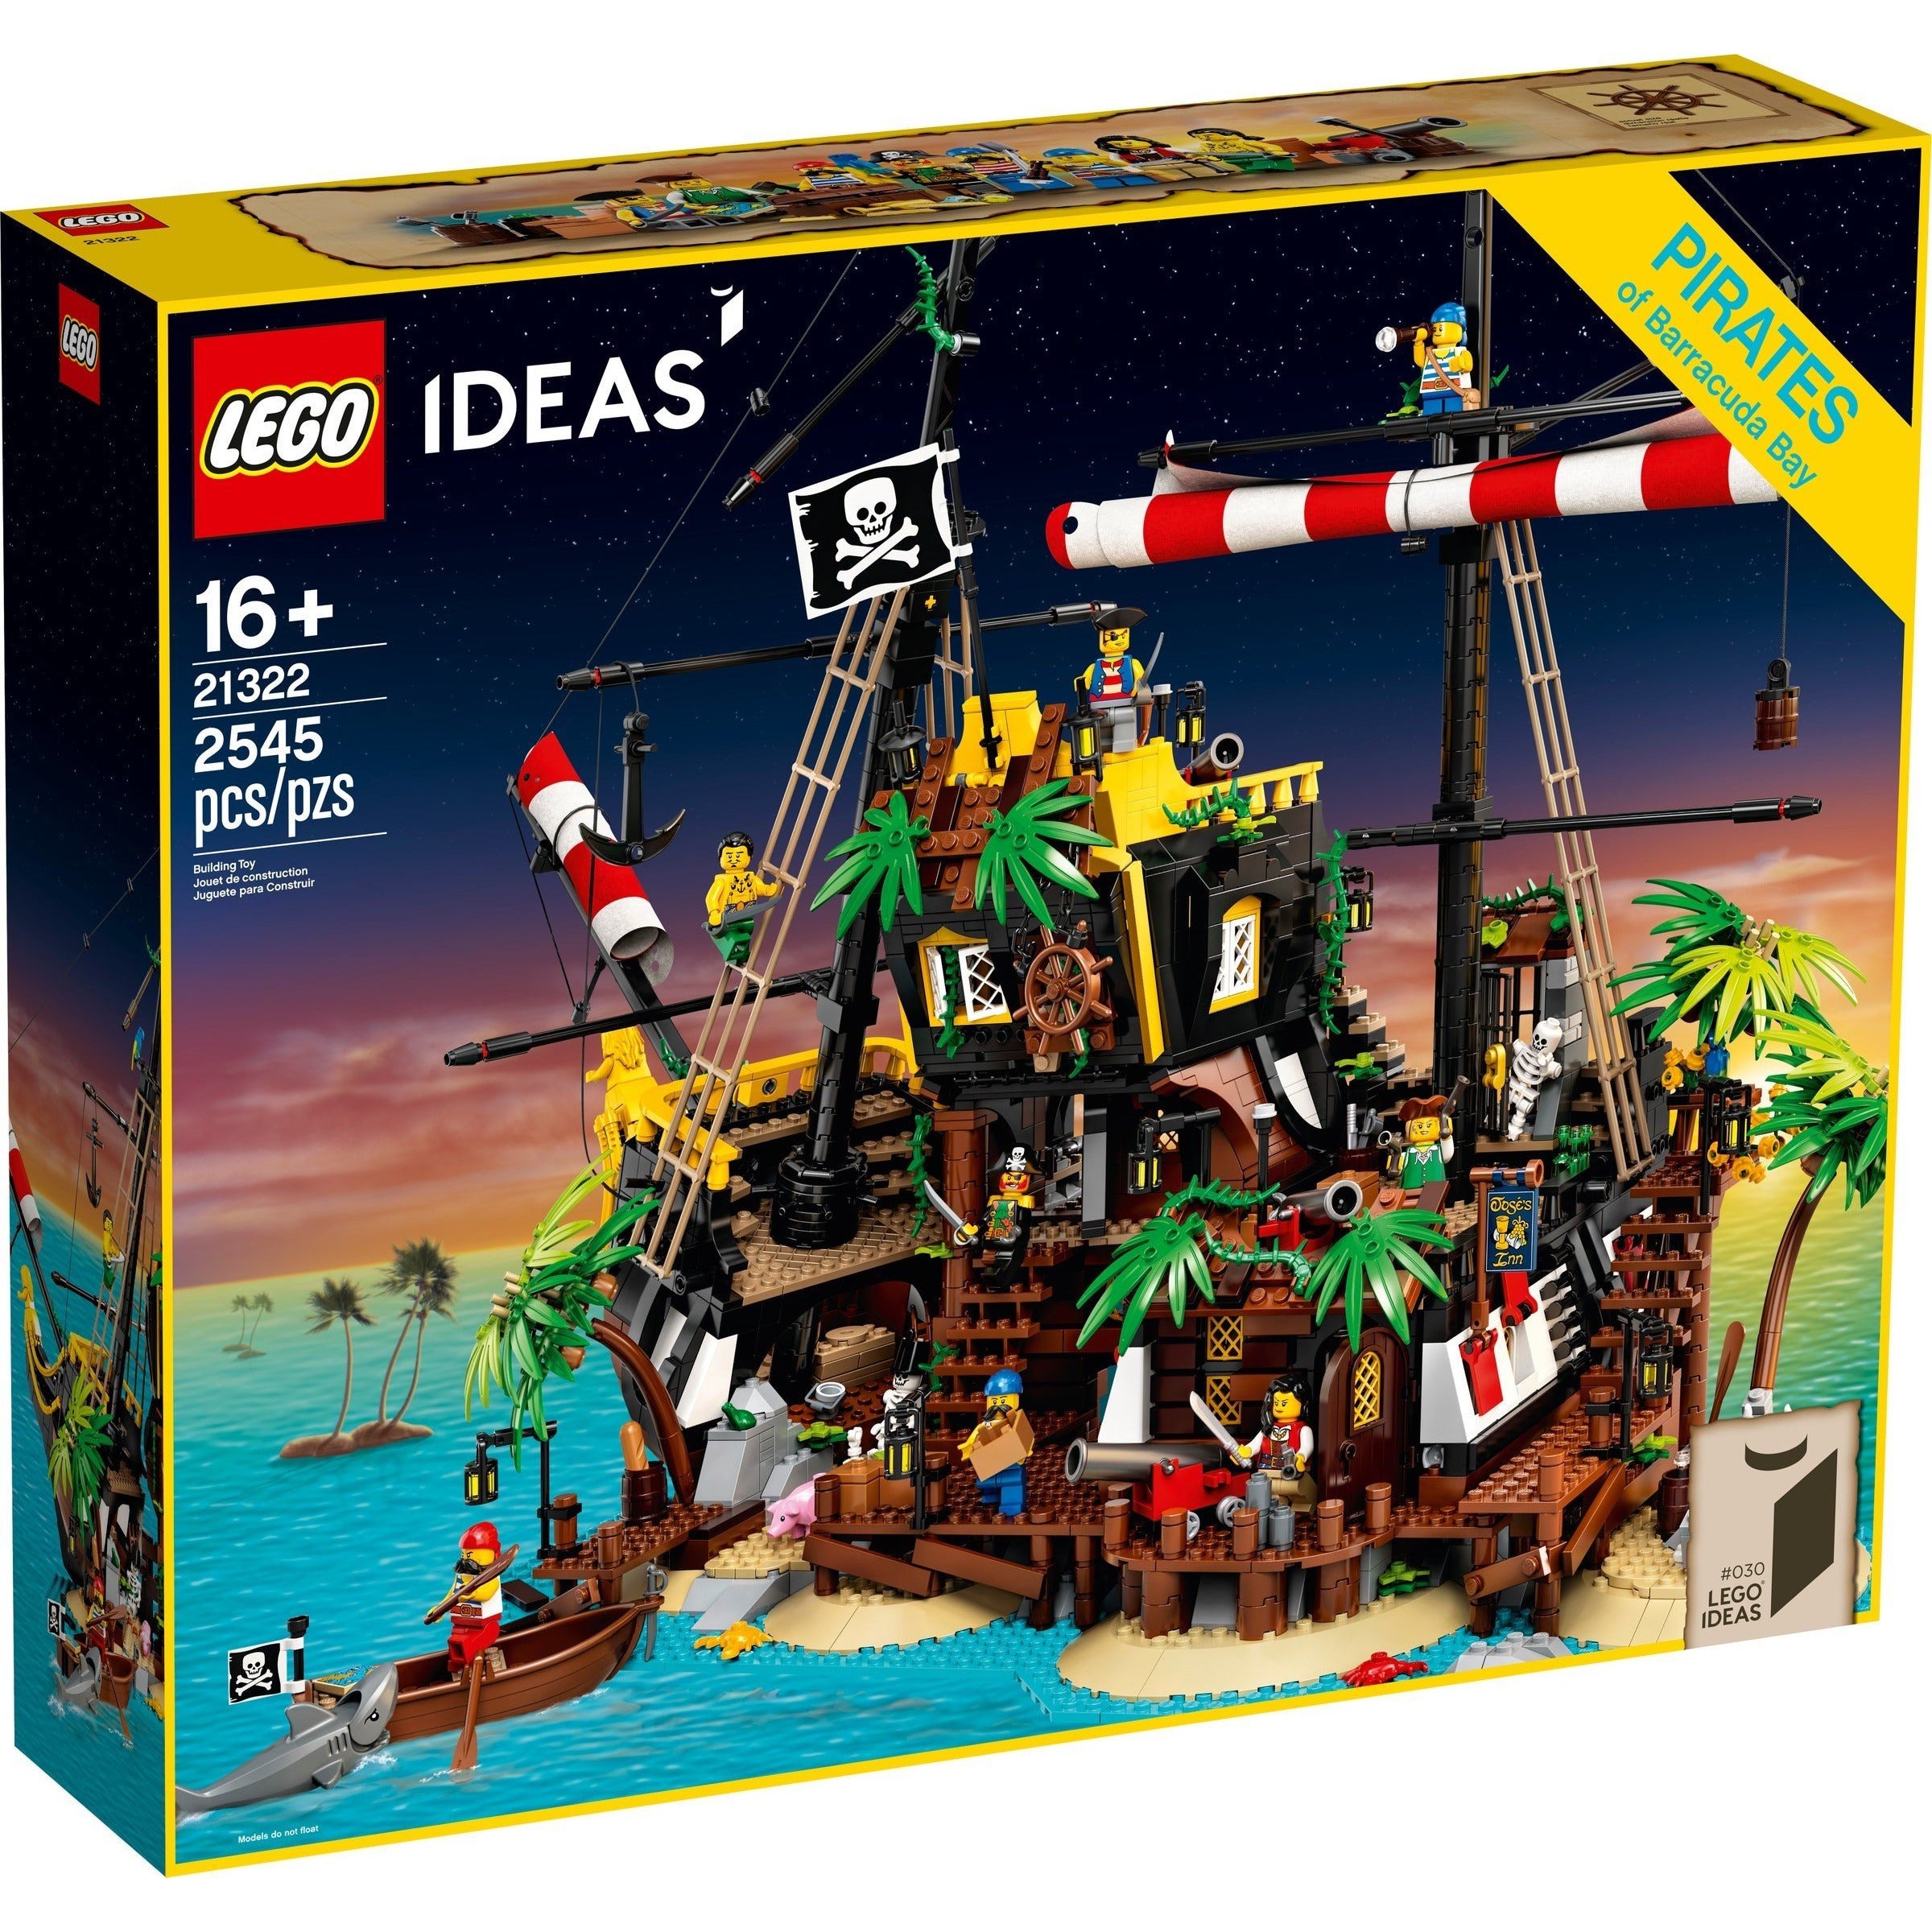 Lego Ideas: Pirates of Barracuda Bay 21322 With lighting kit